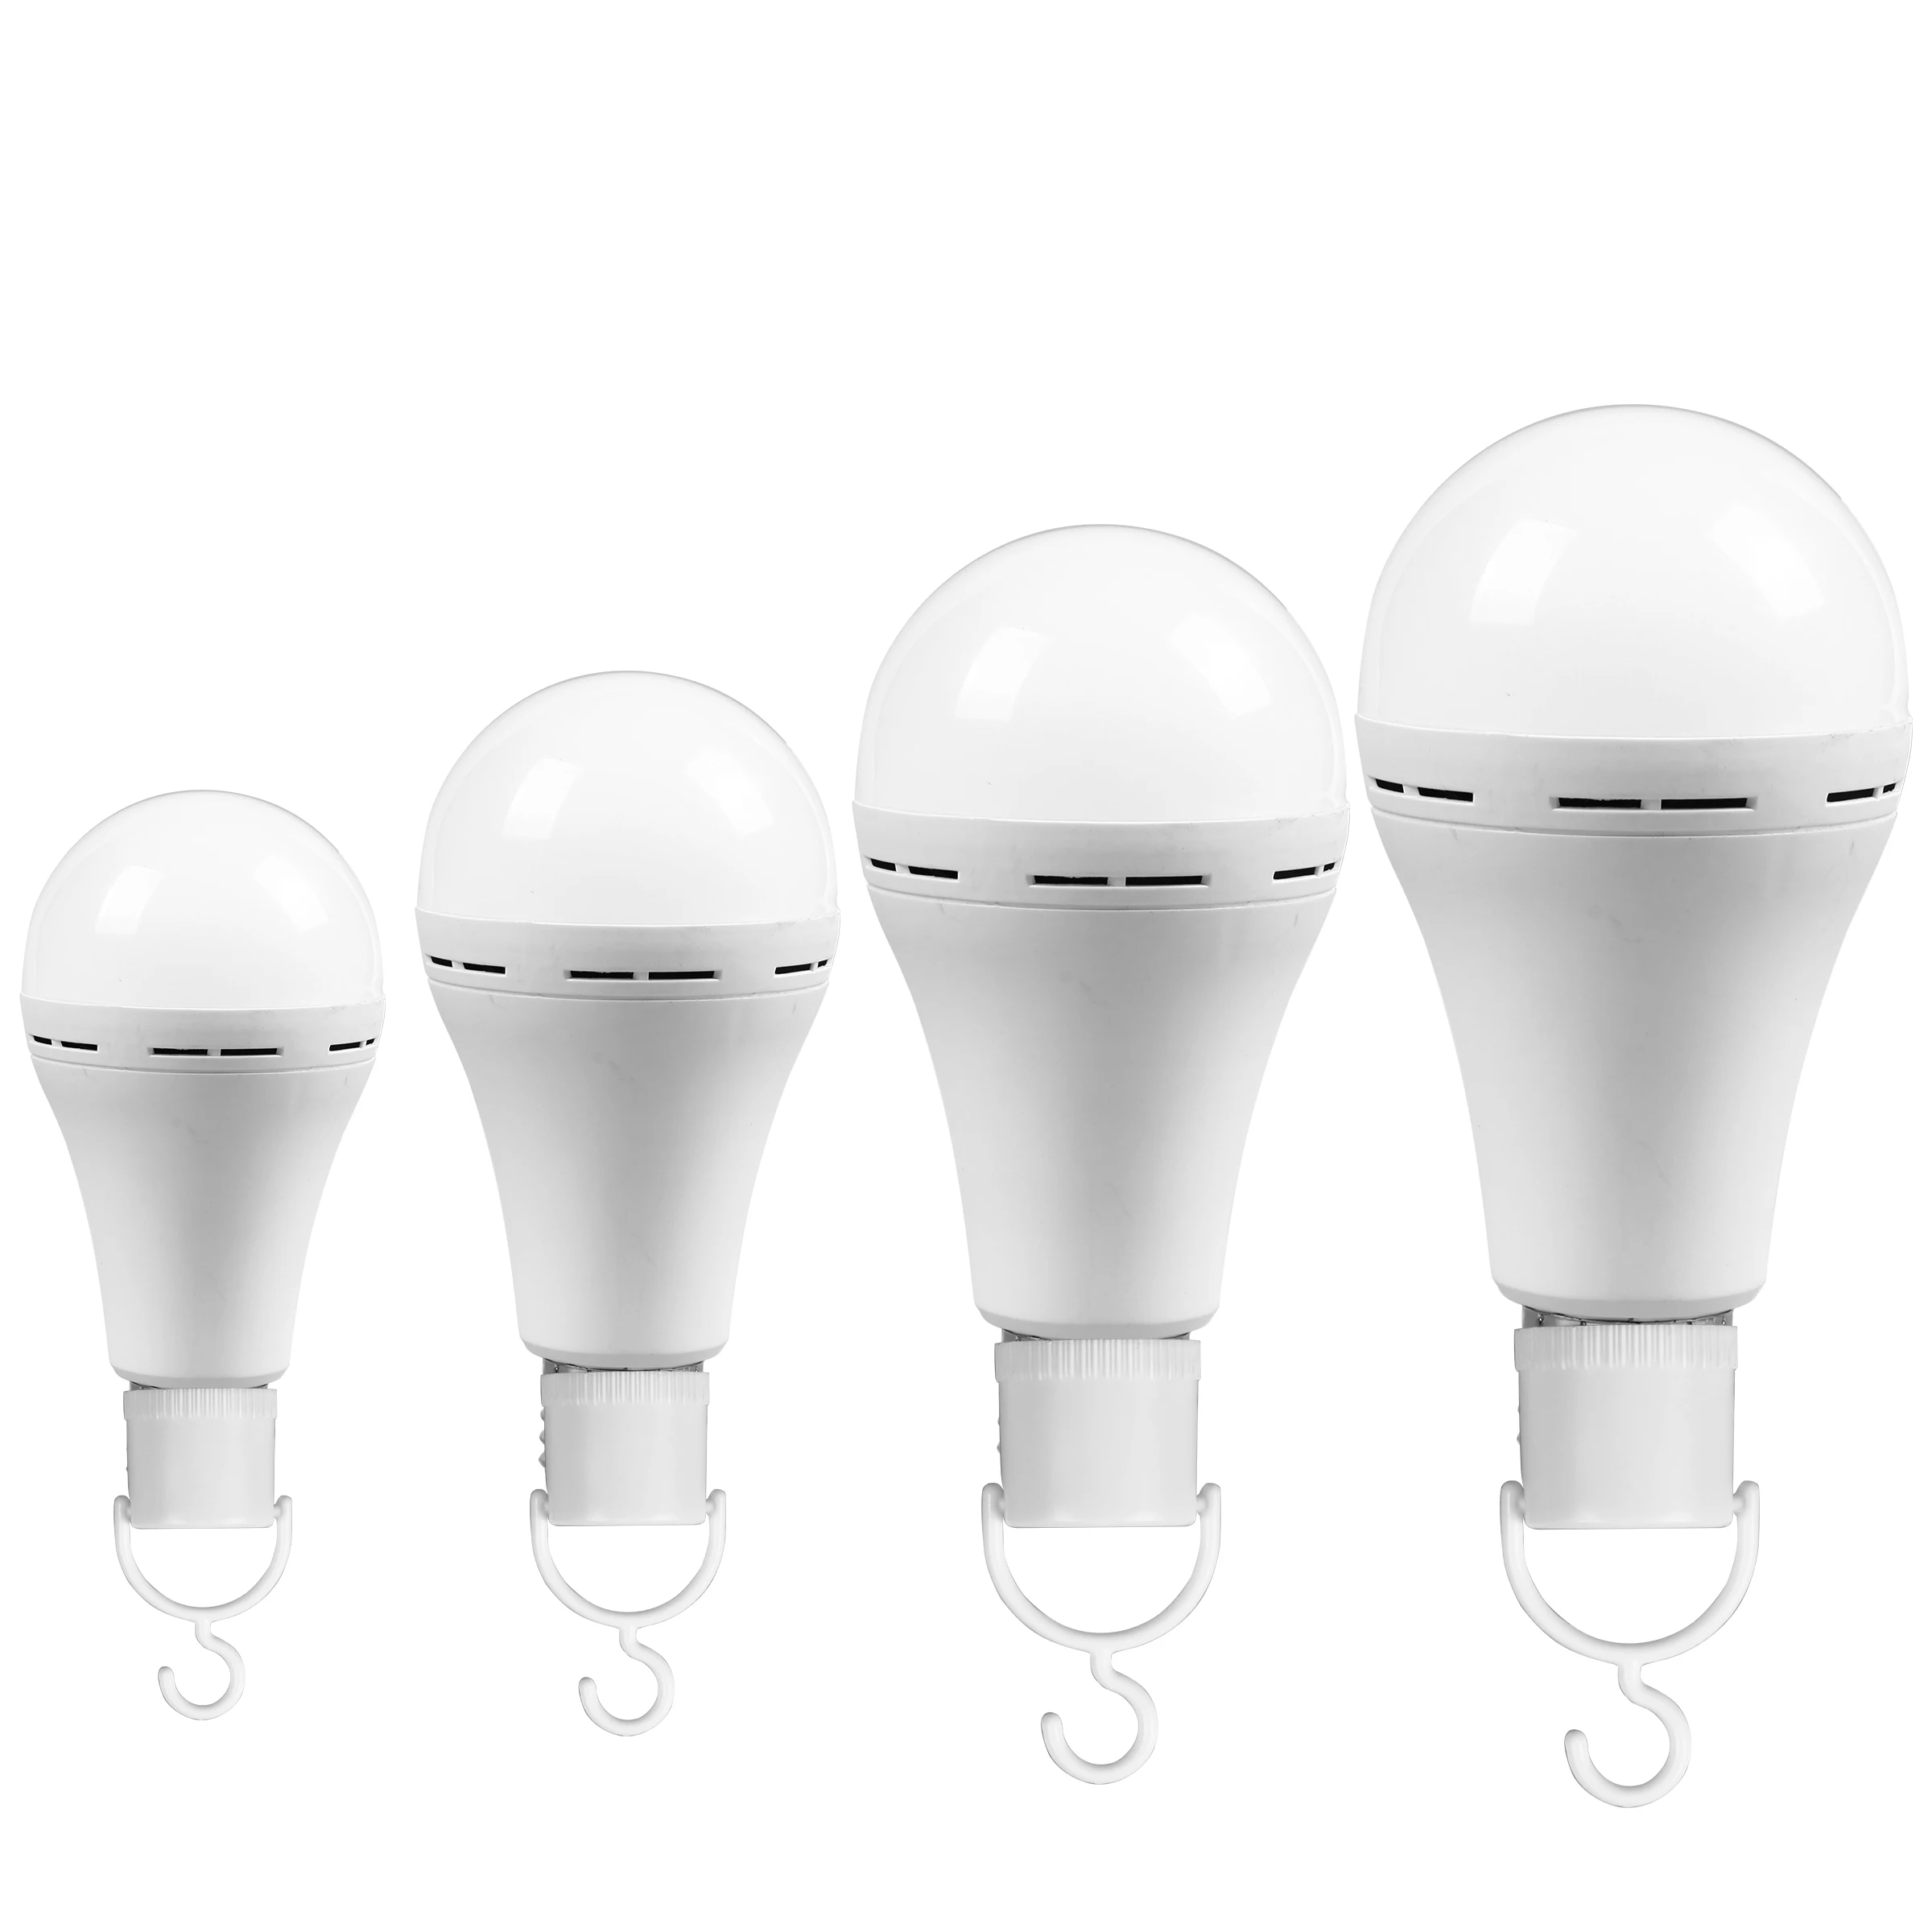 Rechargeable Emergency LED Bulb 6500K  7W 9W 12W Battery Operated Light Bulb E27 B22 for load shedding power outage